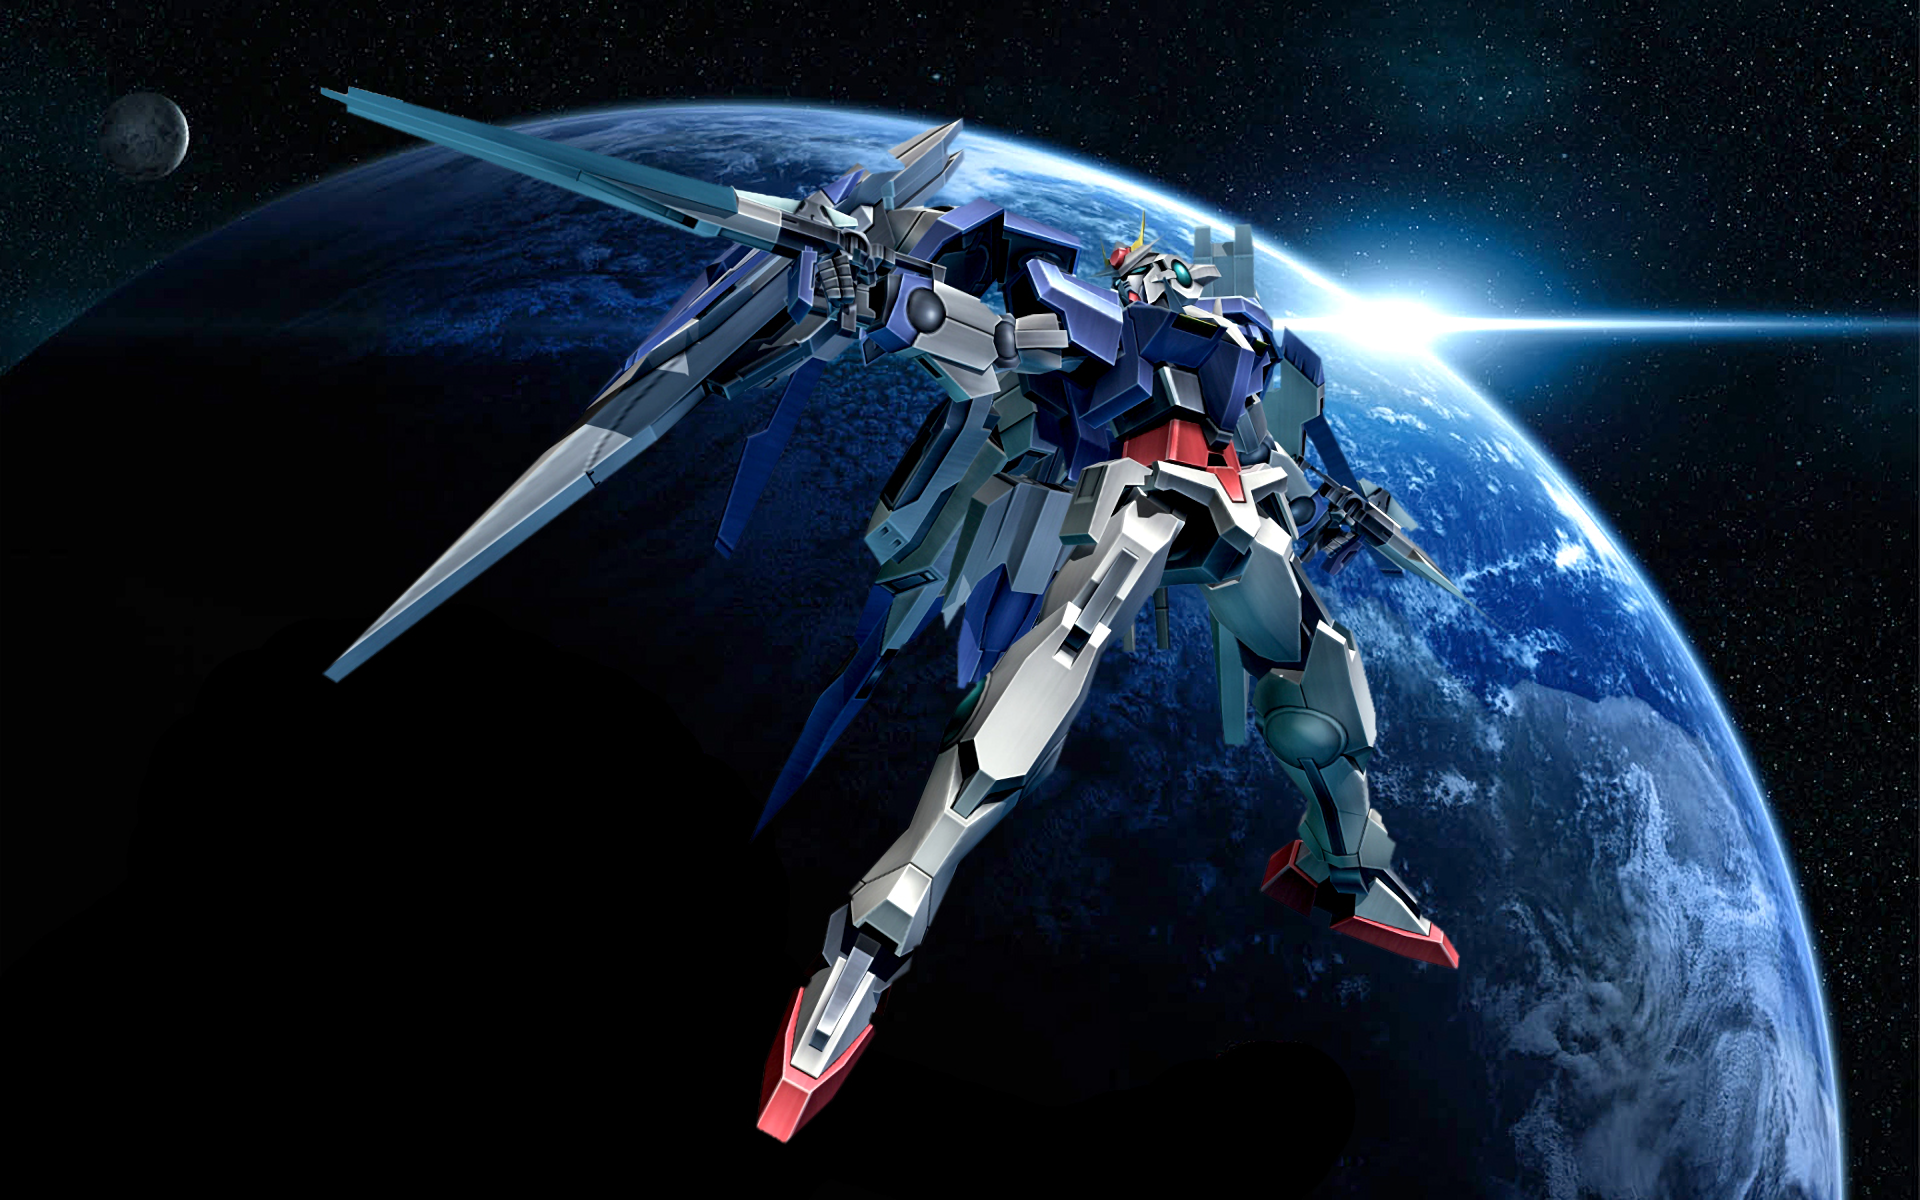 gundam wallpaper,spacecraft,outer space,space,space station,vehicle